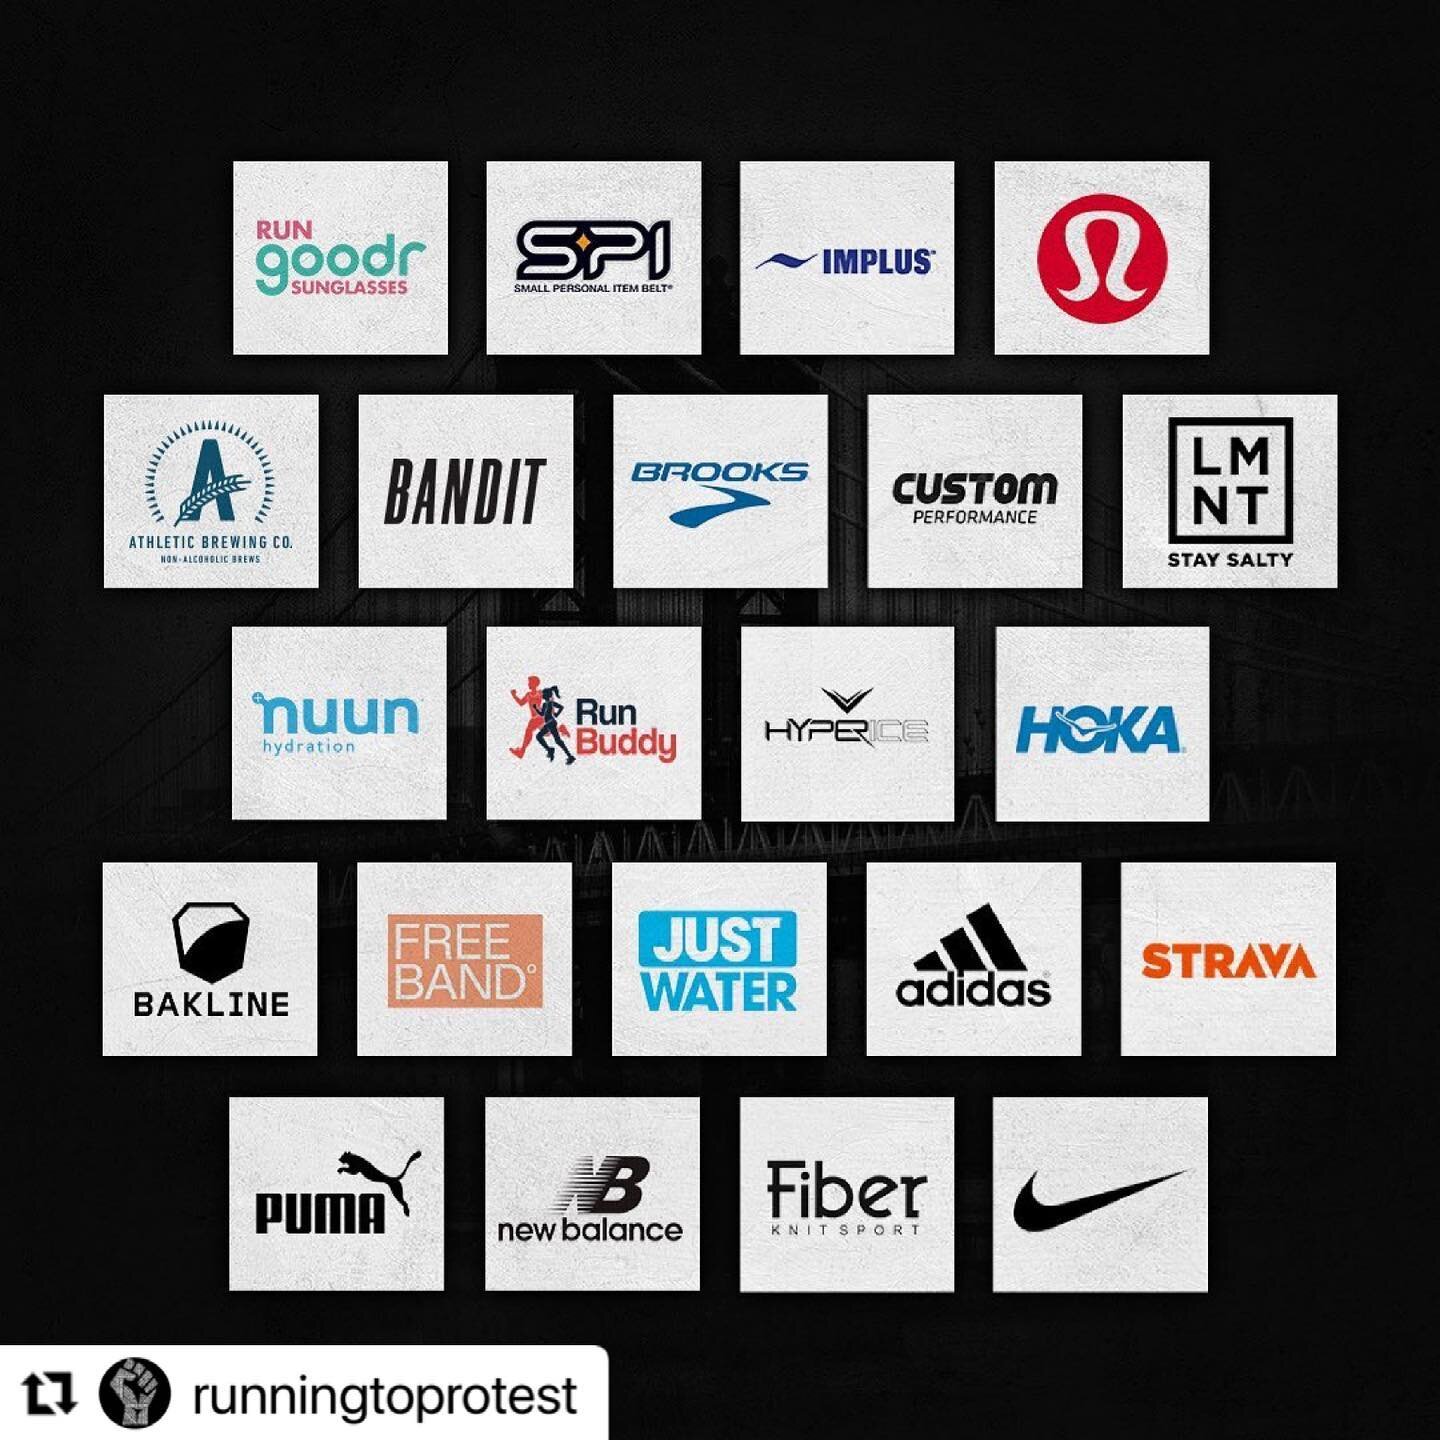 We&rsquo;re excited to join forces with @runningtoprotest to shed some more light on Runner Safety. It is also great to see so many other brands and organizations joining and supporting the cause. See you on Saturday @ 8am. More deets to follow. #run